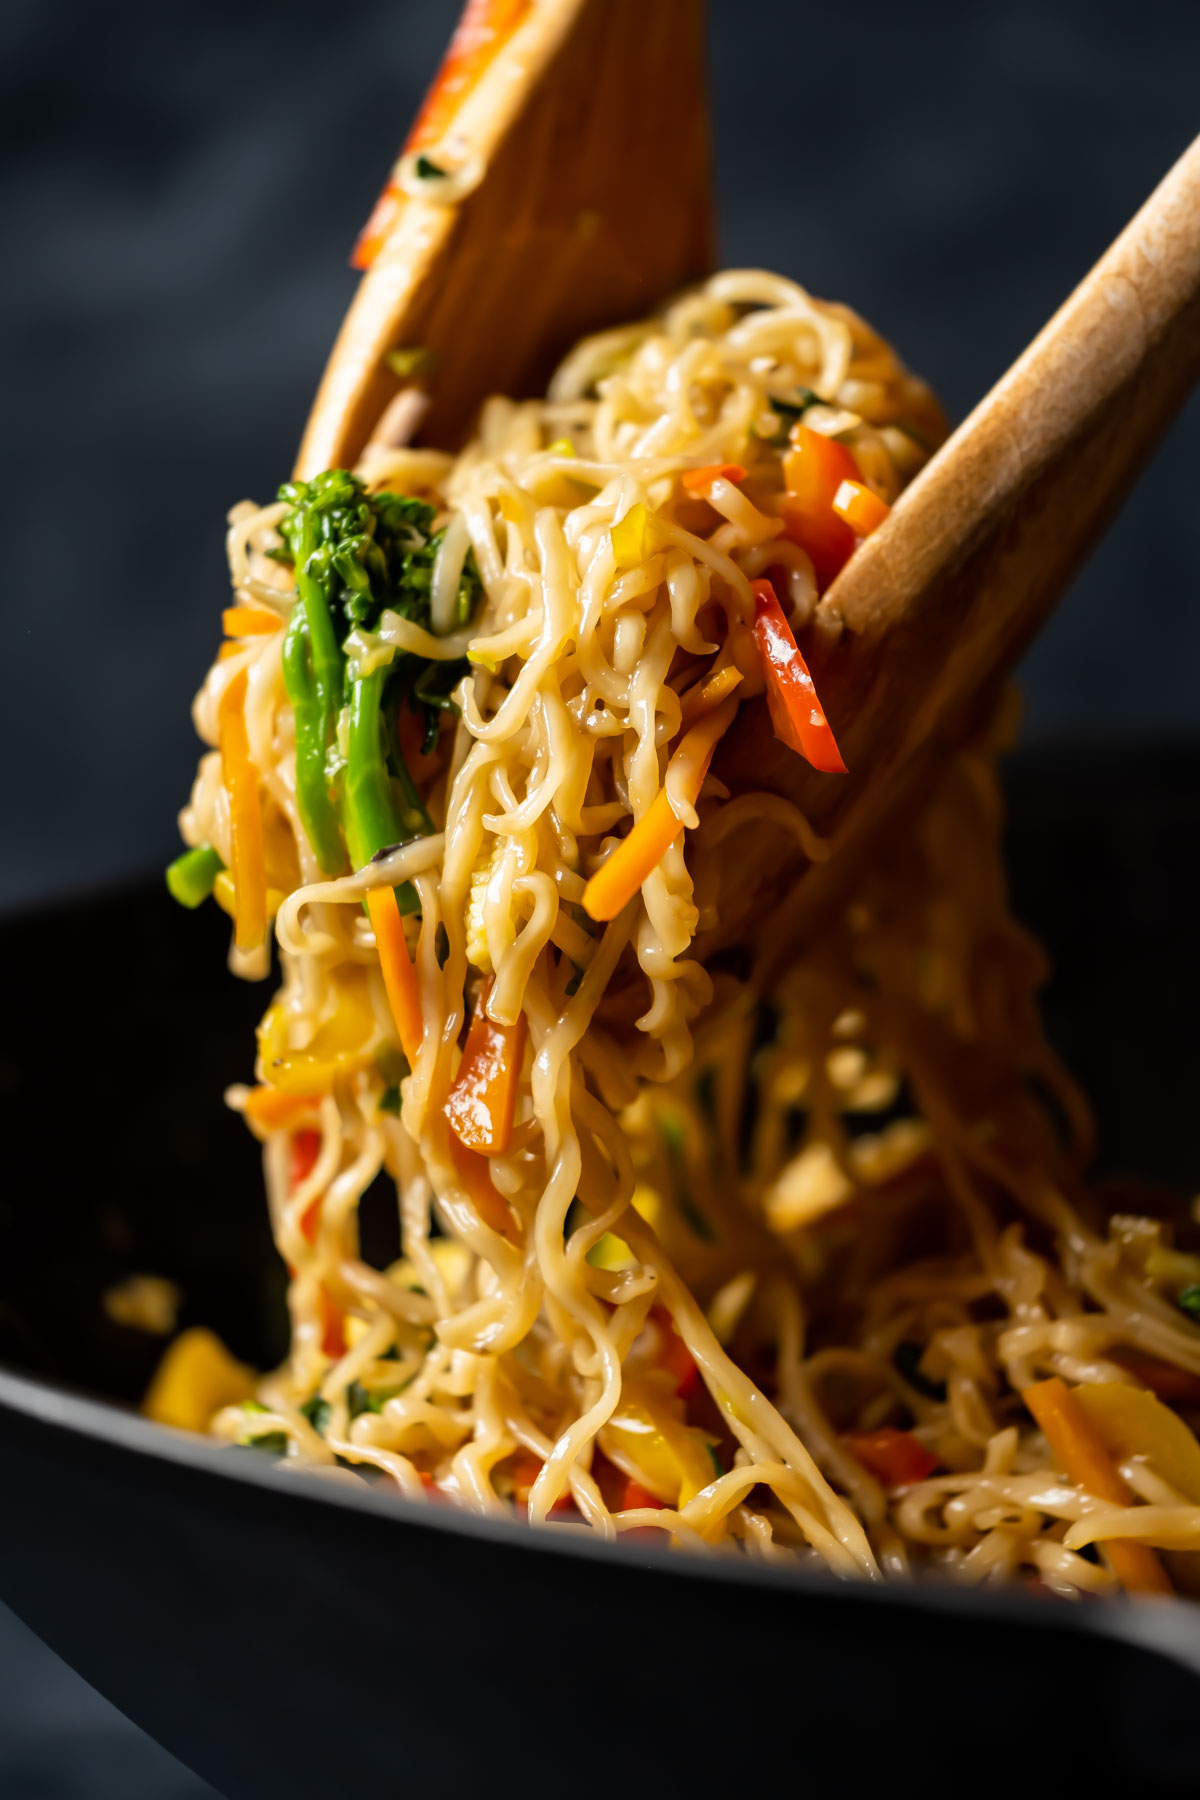 Wooden serving spoons lifting noodles and veggies out of a wok.